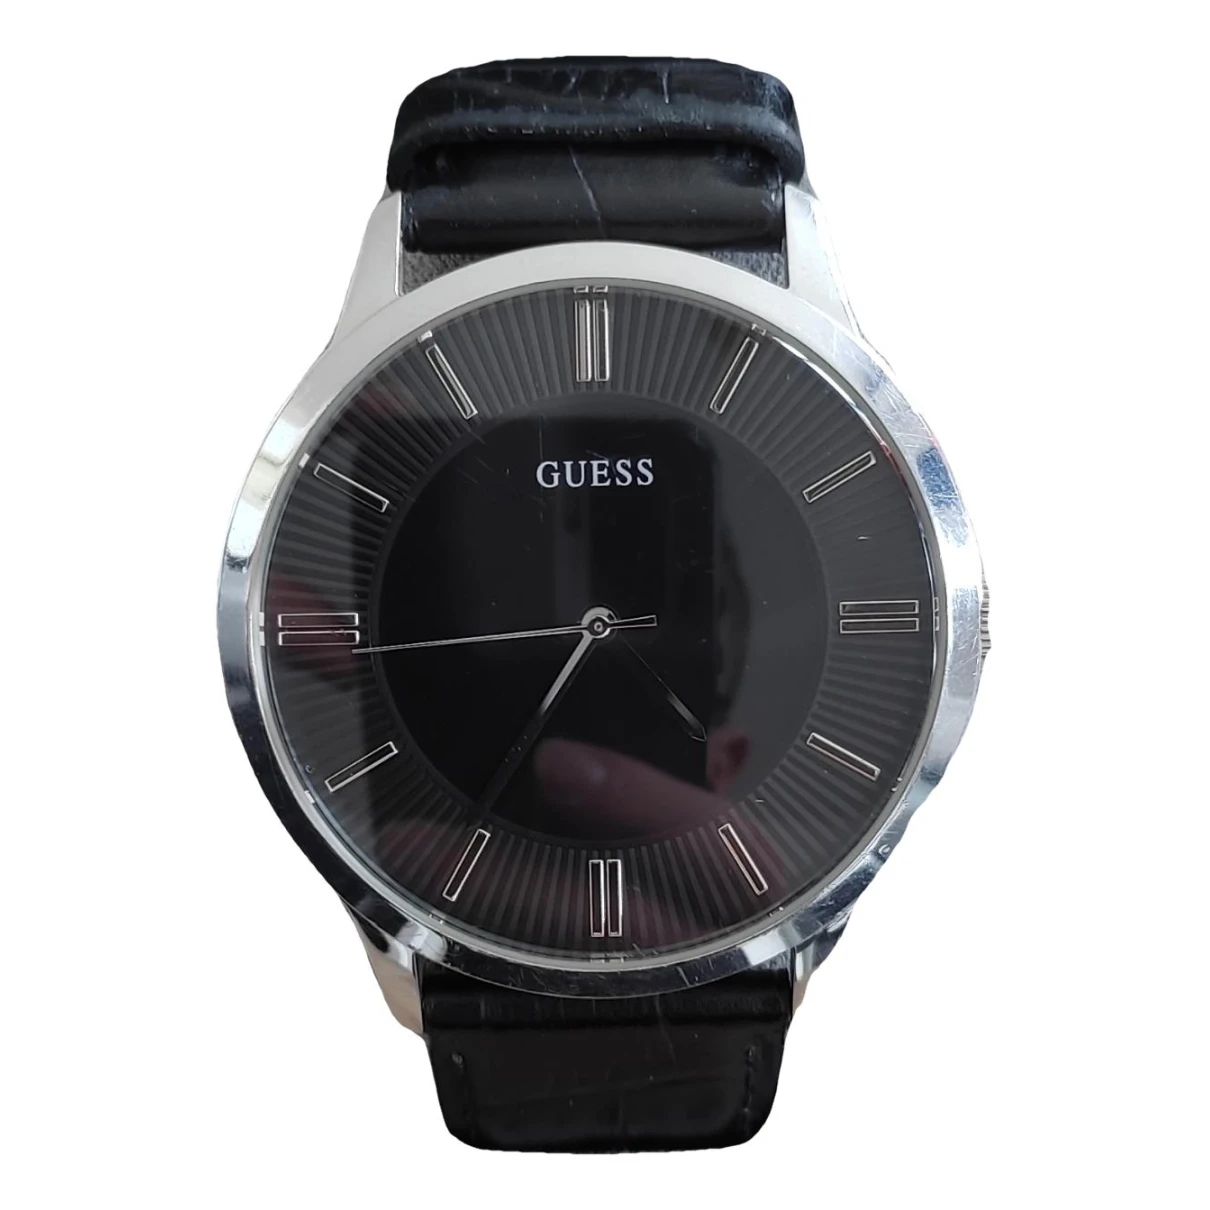 accessories Guess watches for Male Steel. Used condition